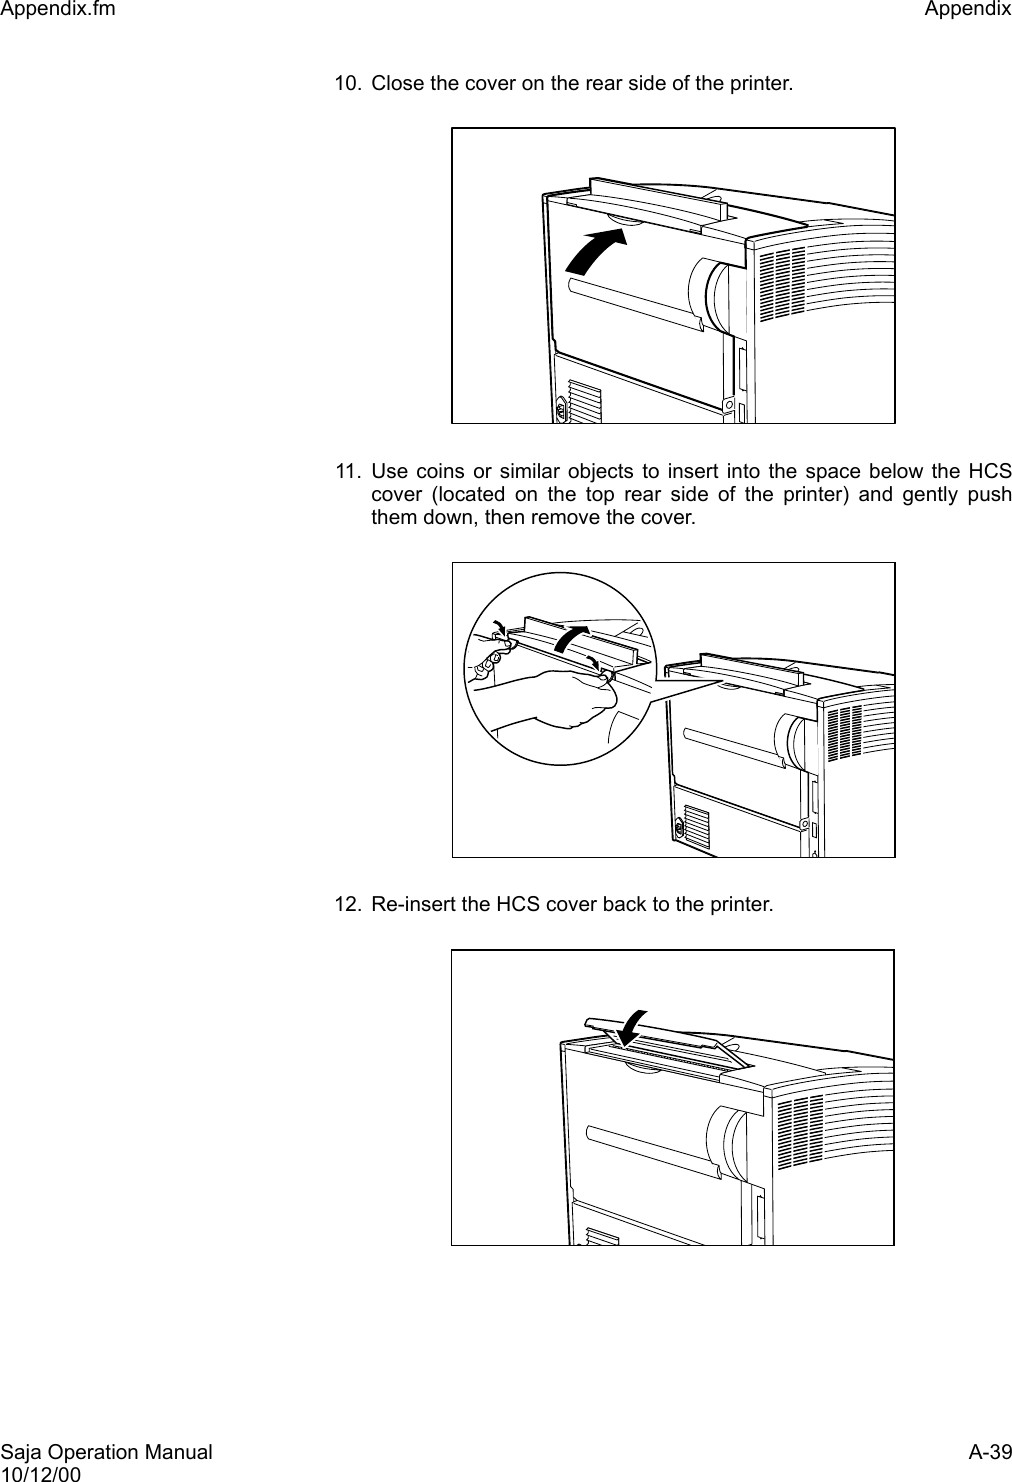 Saja Operation Manual A-3910/12/00Appendix.fm Appendix 10. Close the cover on the rear side of the printer.11. Use coins or similar objects to insert into the space below the HCScover (located on the top rear side of the printer) and gently pushthem down, then remove the cover.12. Re-insert the HCS cover back to the printer.